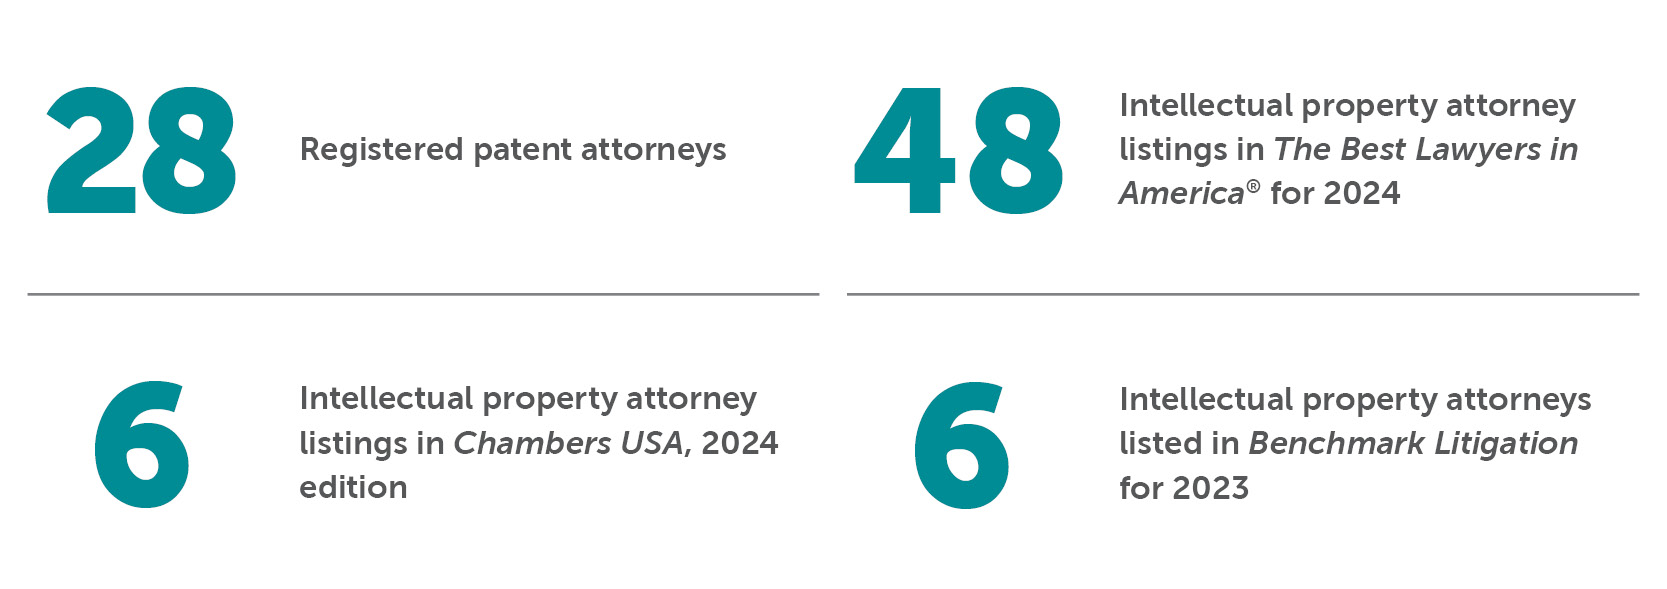 Intellectual Property Bradley By the Numbers